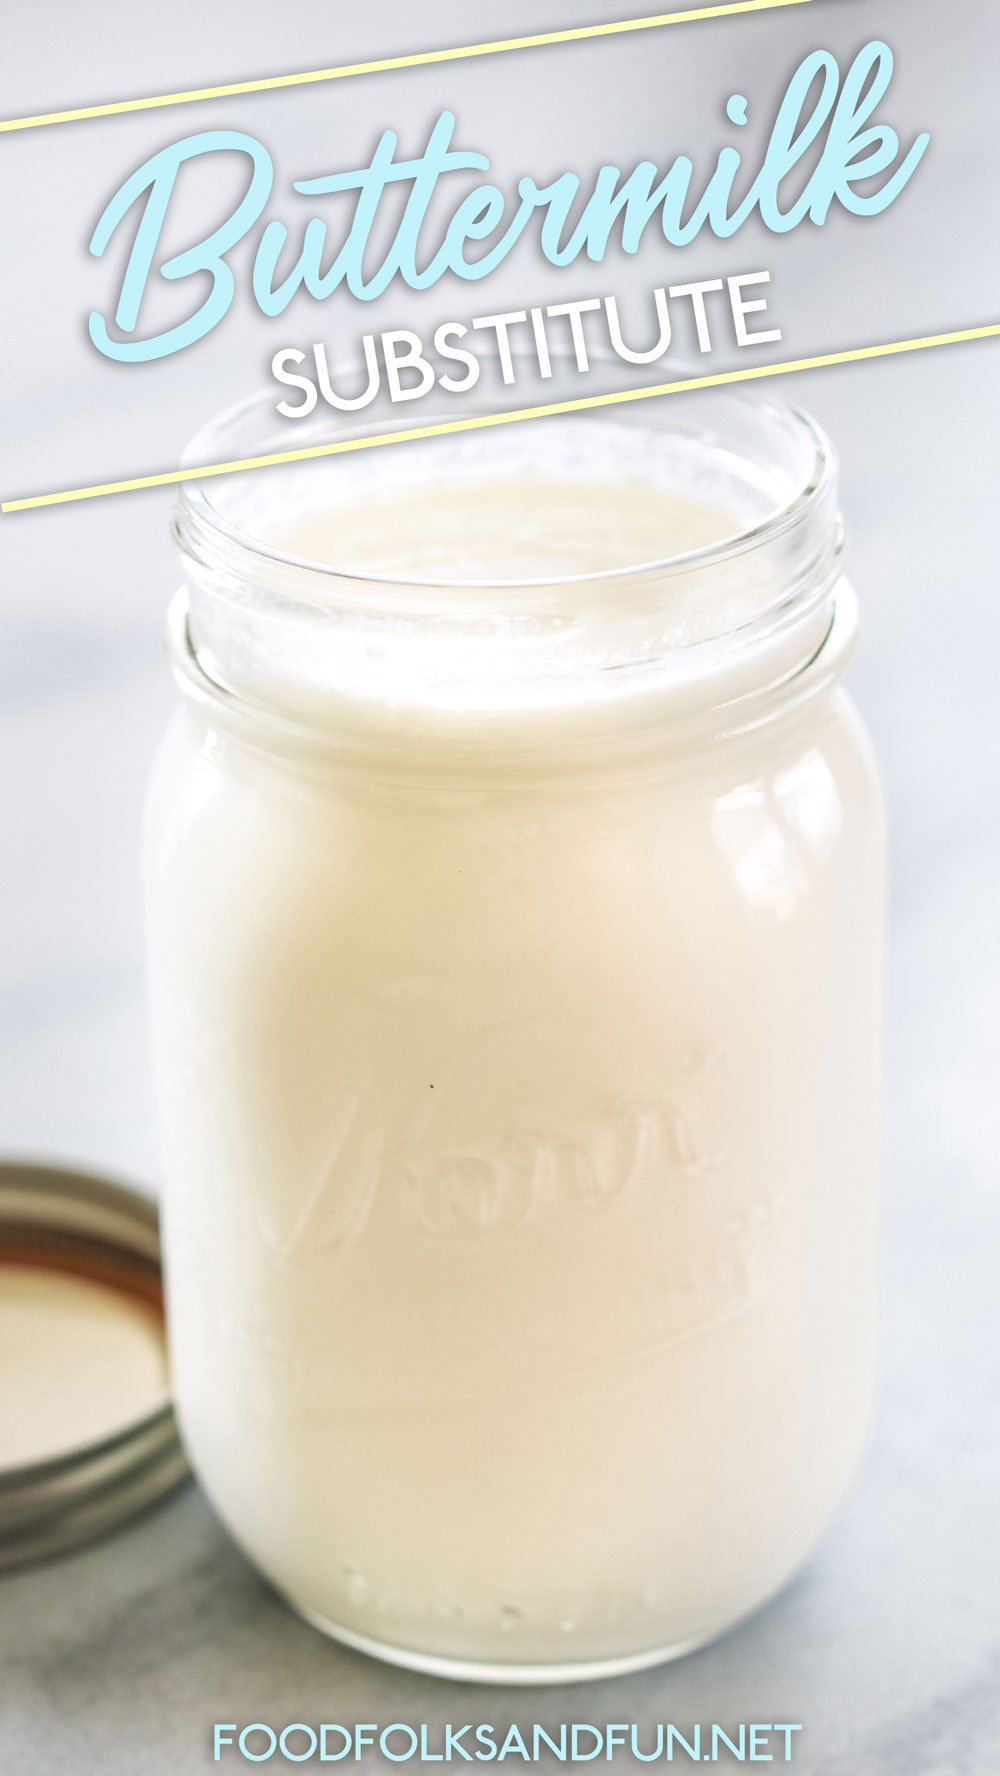 Buttermilk Substitute in a mason jar with text overlay for Pinterest